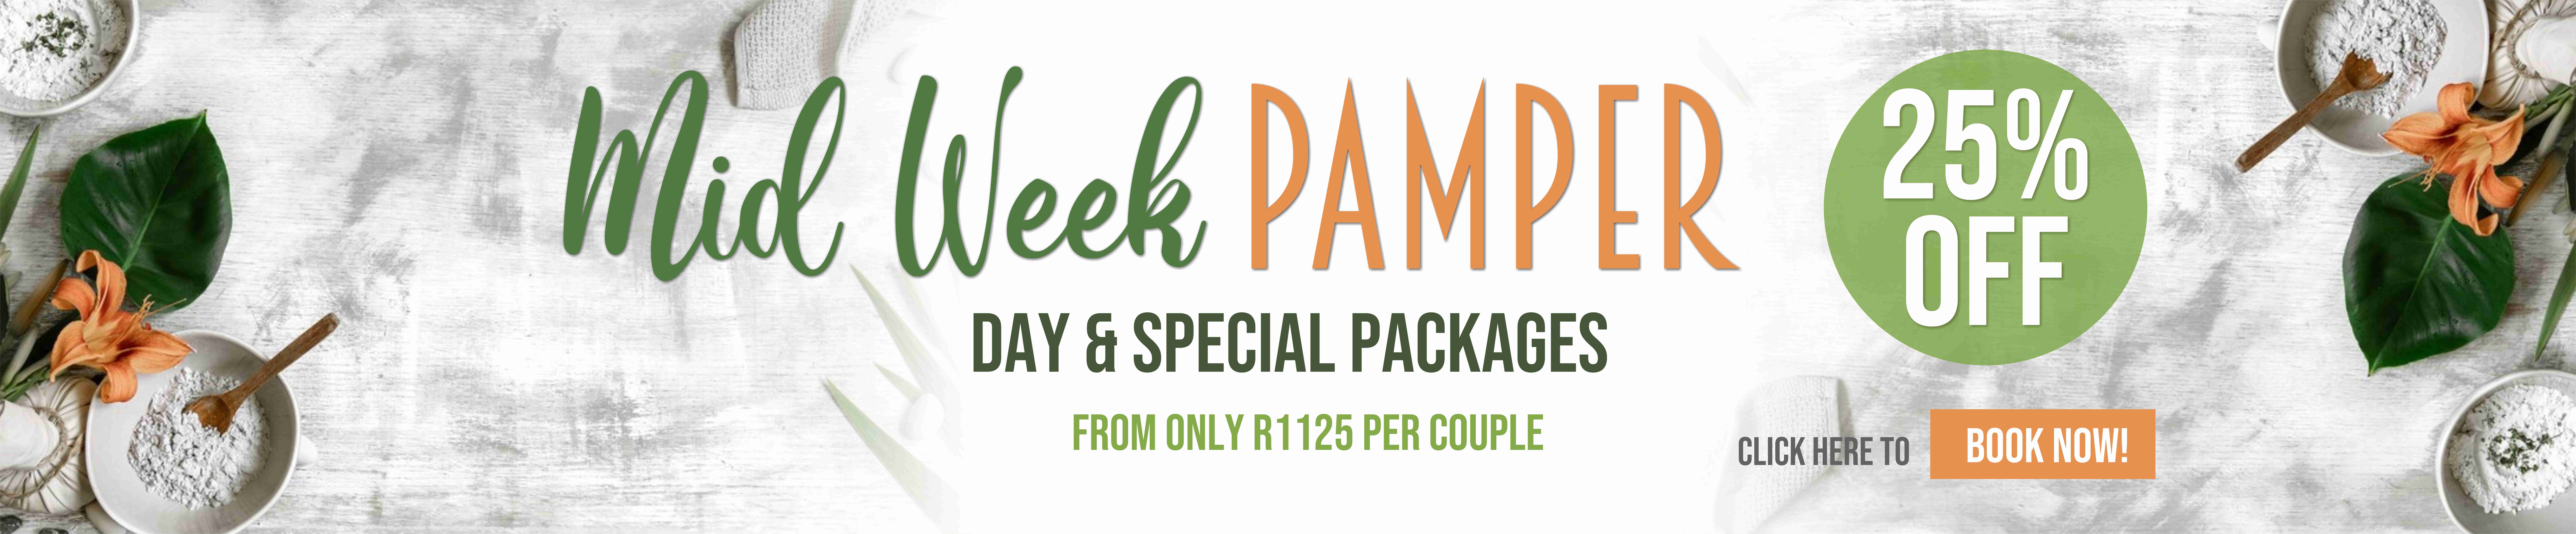 Spa in the Country Midweek Treatment Packages for Spas in Gauteng & Rustenburg